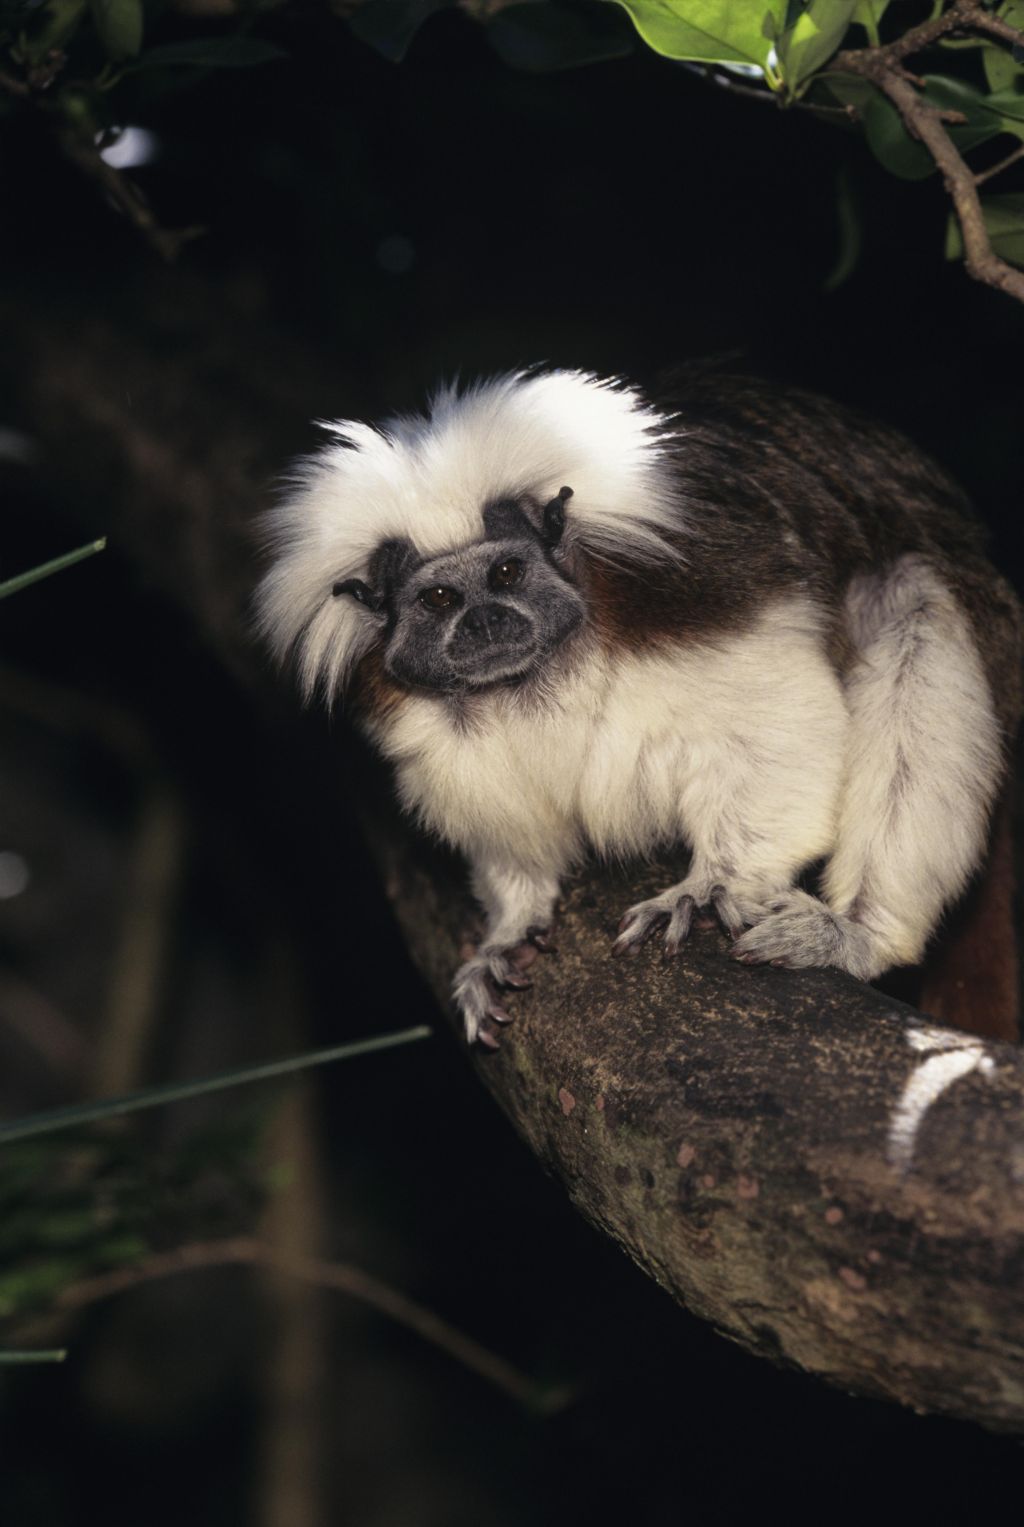 Cotton-top tamarin (Saguinus oedipus), Central or South America